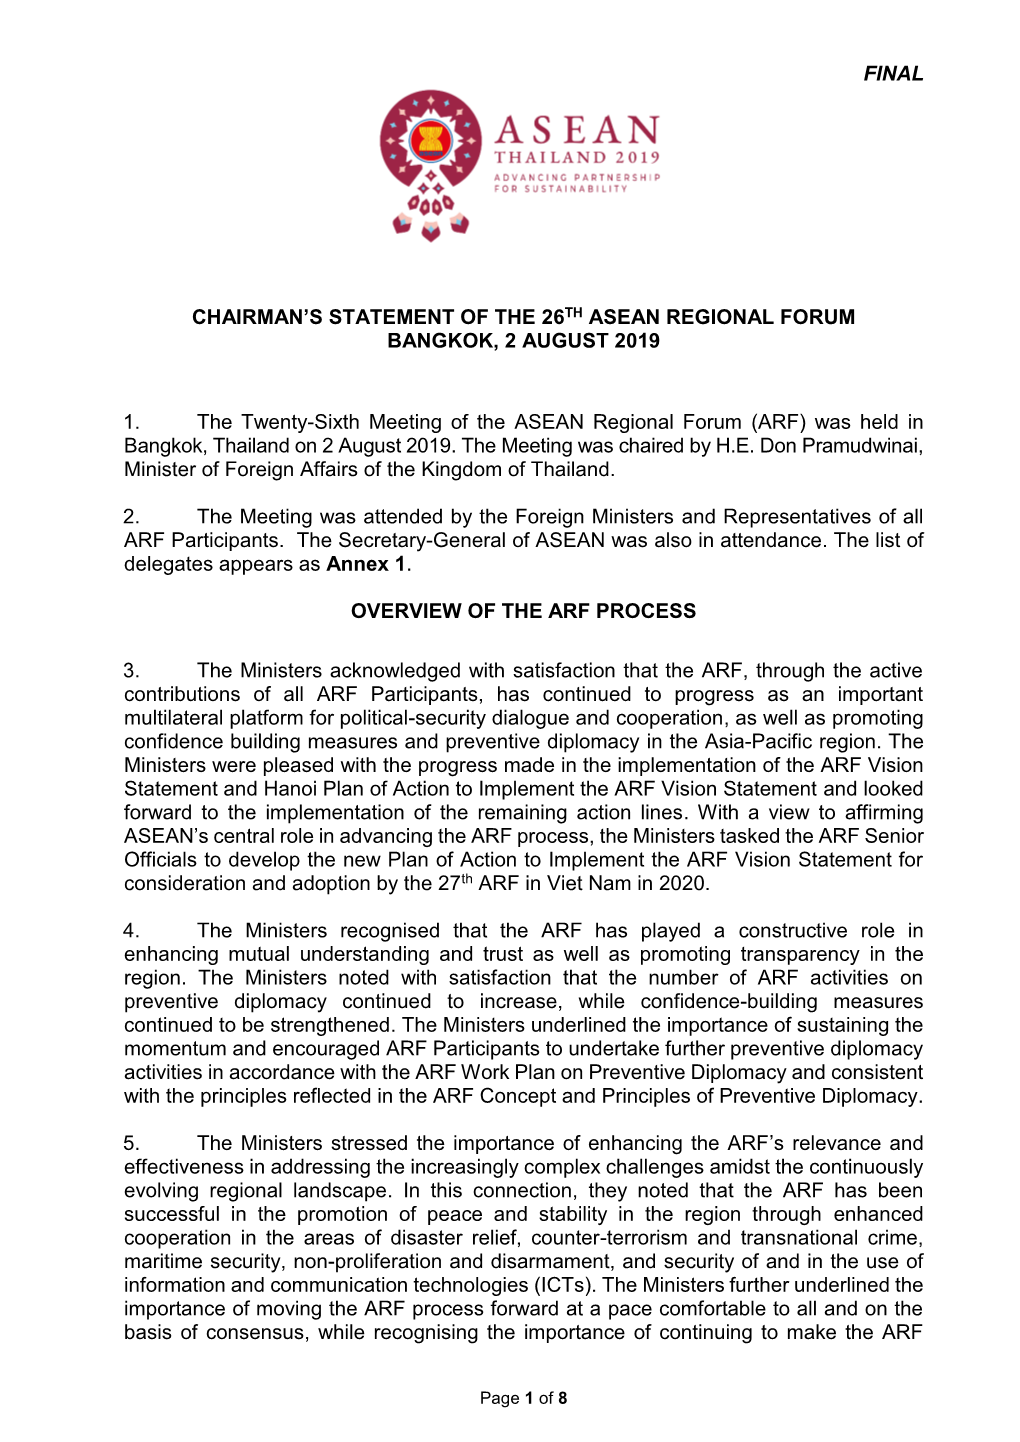 Chairman's Statement of the 26Th ASEAN Regional Forum